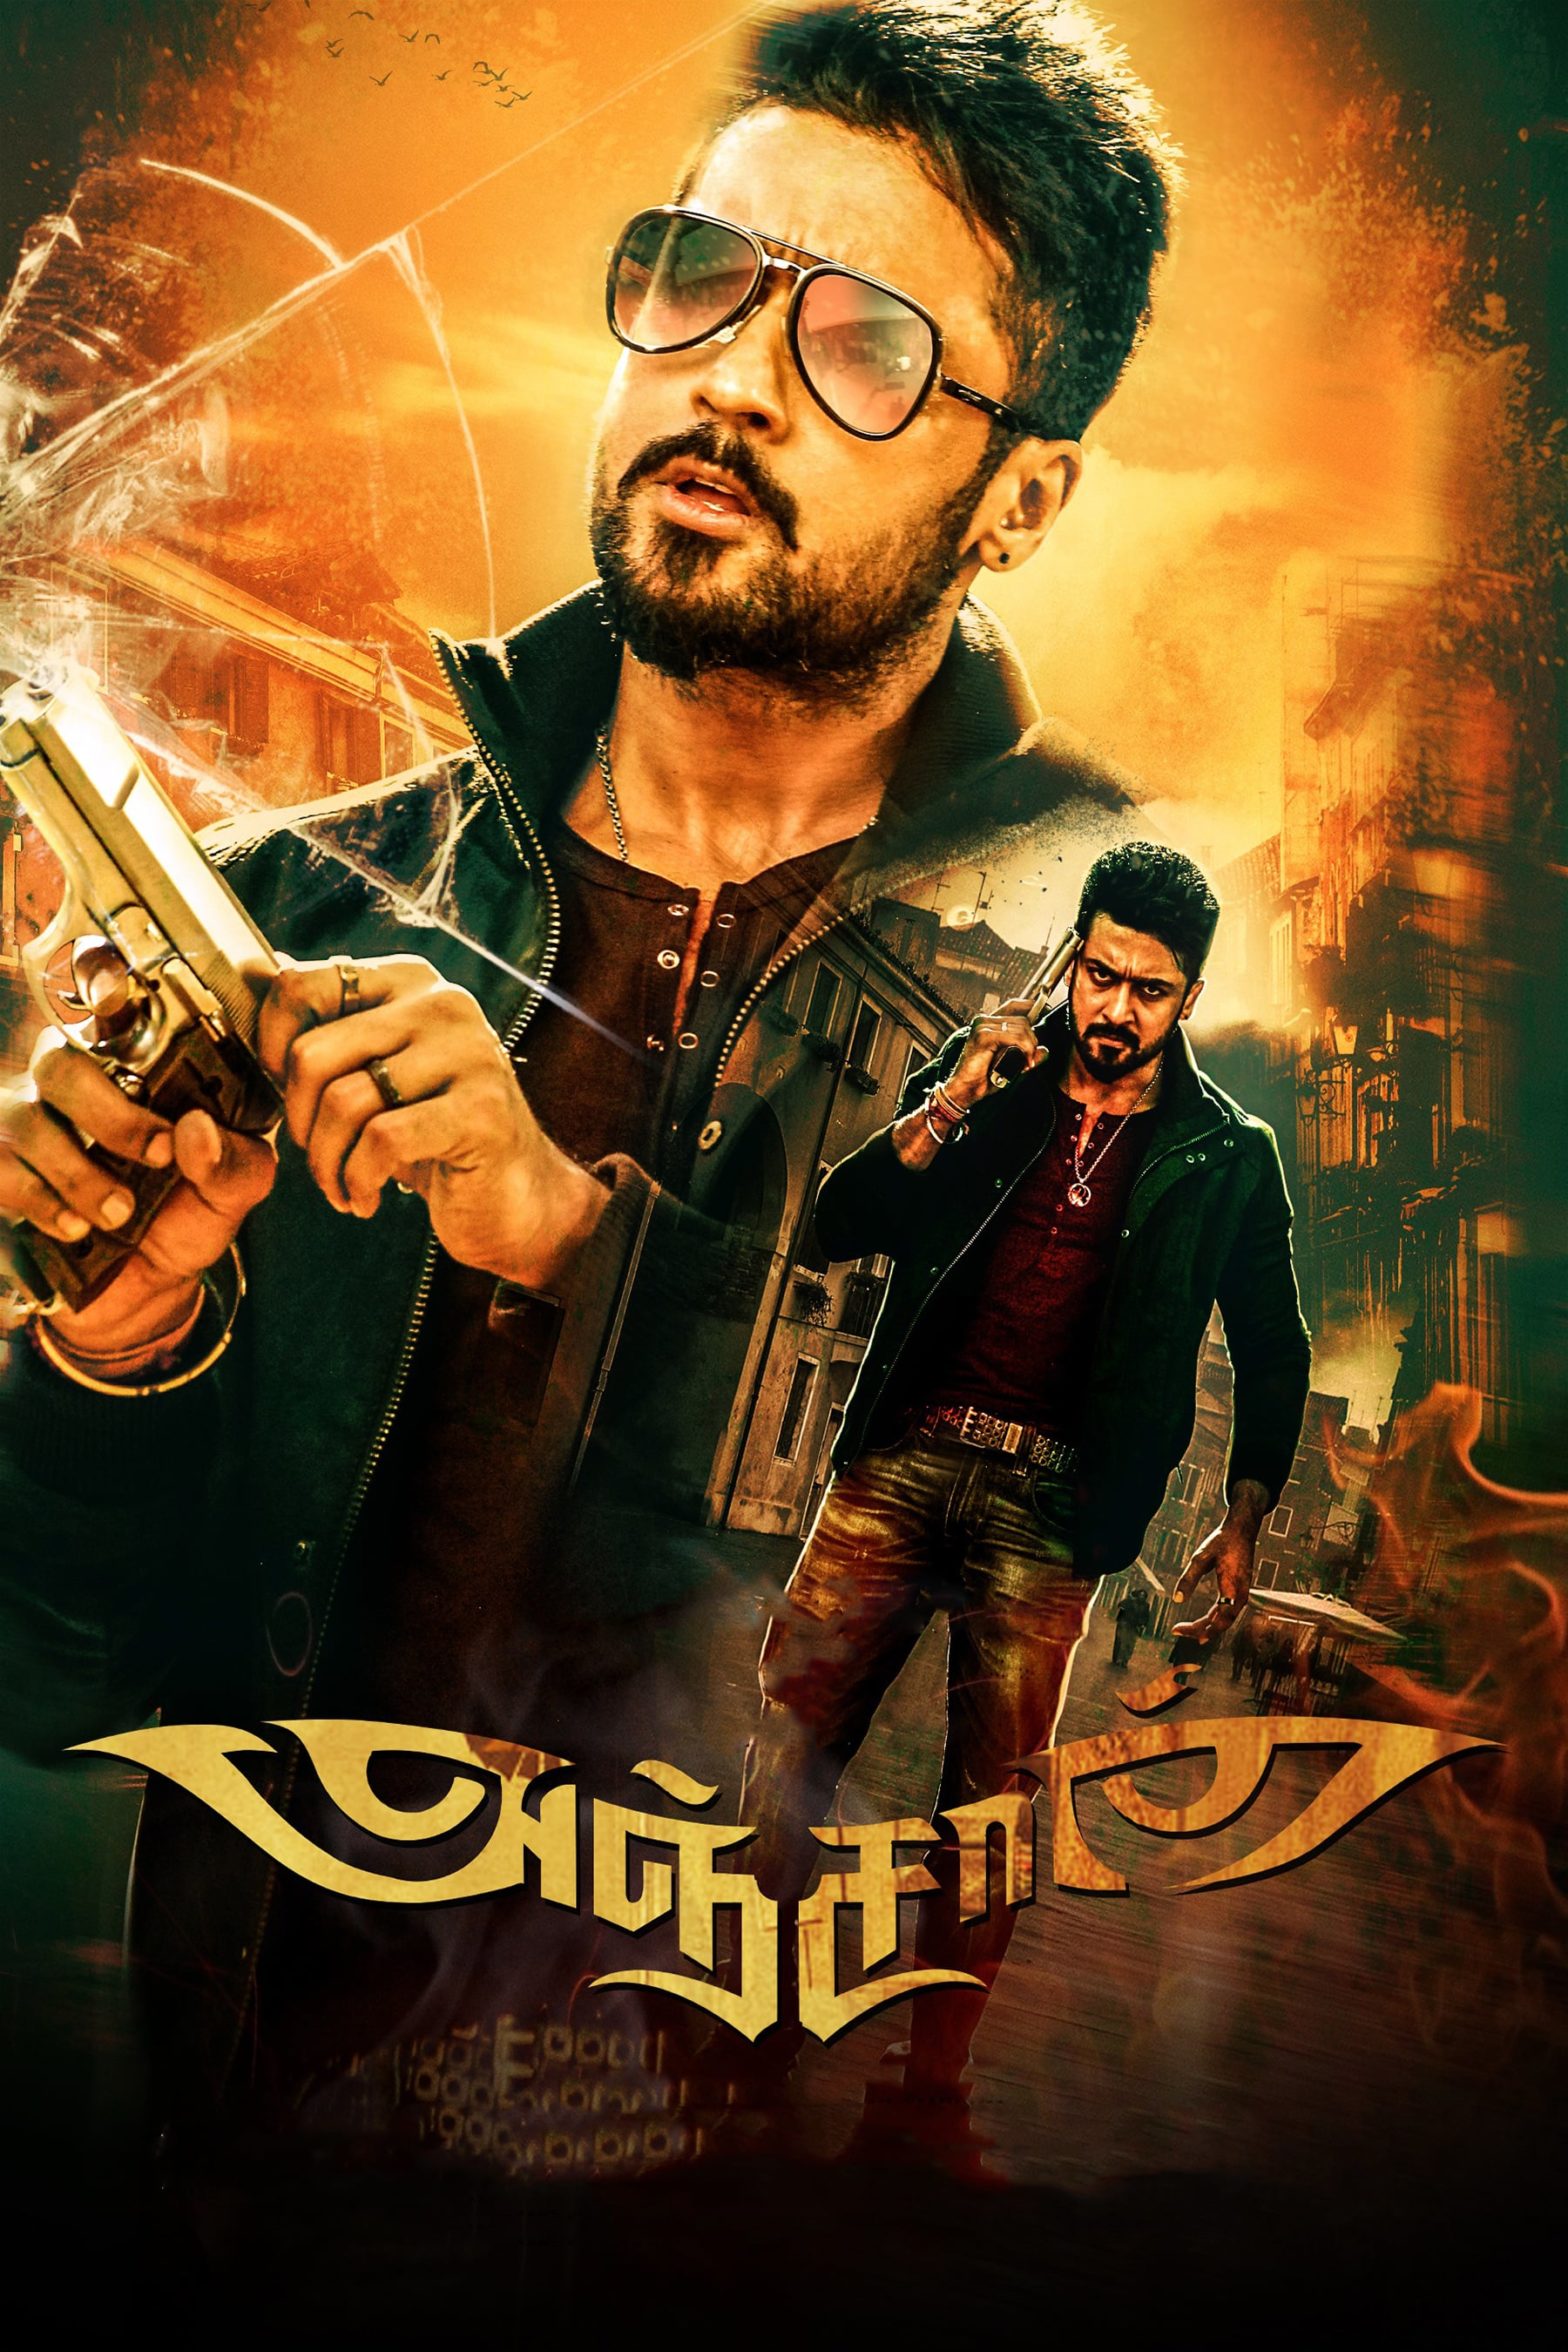 Poster for the movie "Anjaan"